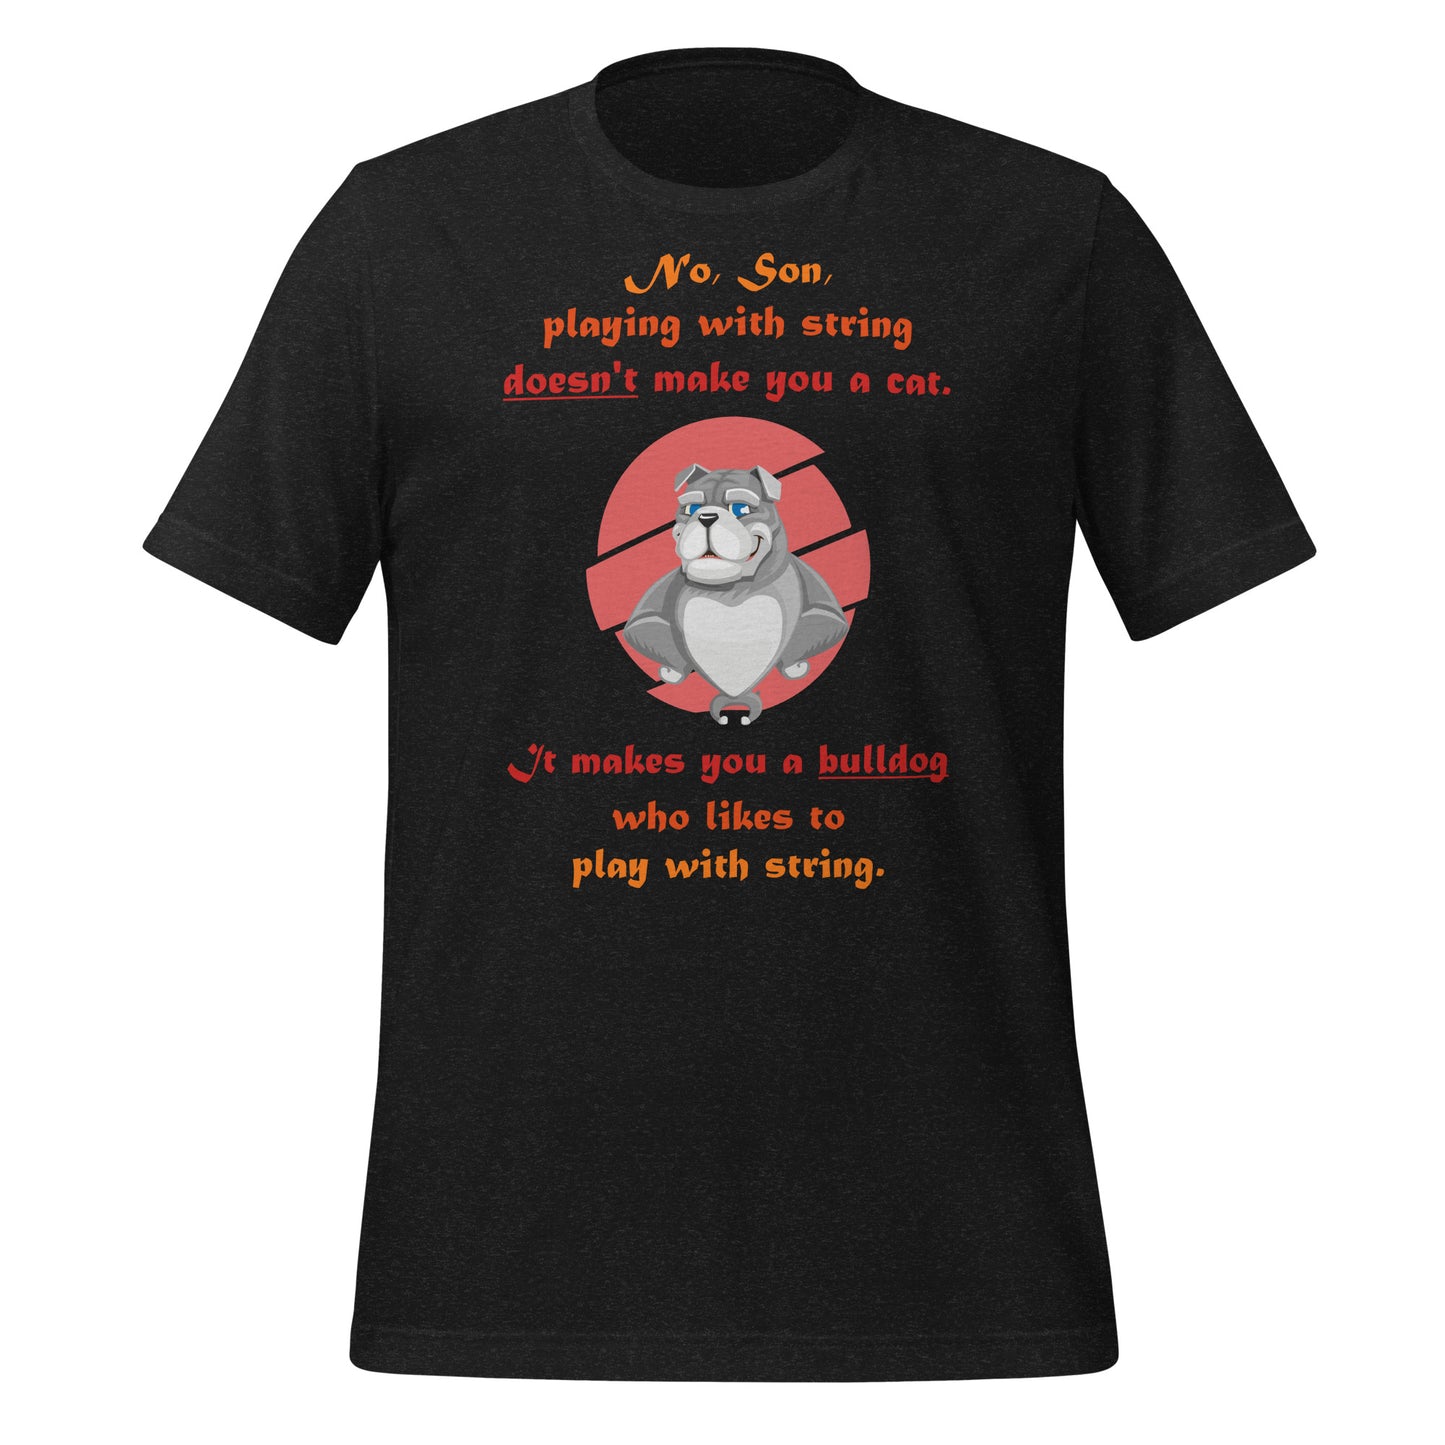 A003 T-shirt - Bella + Canvas 3001 Unisex T-shirt Featuring Papa Bulldog Telling His Son, “Playing with String Doesn’t Make You a Cat.”